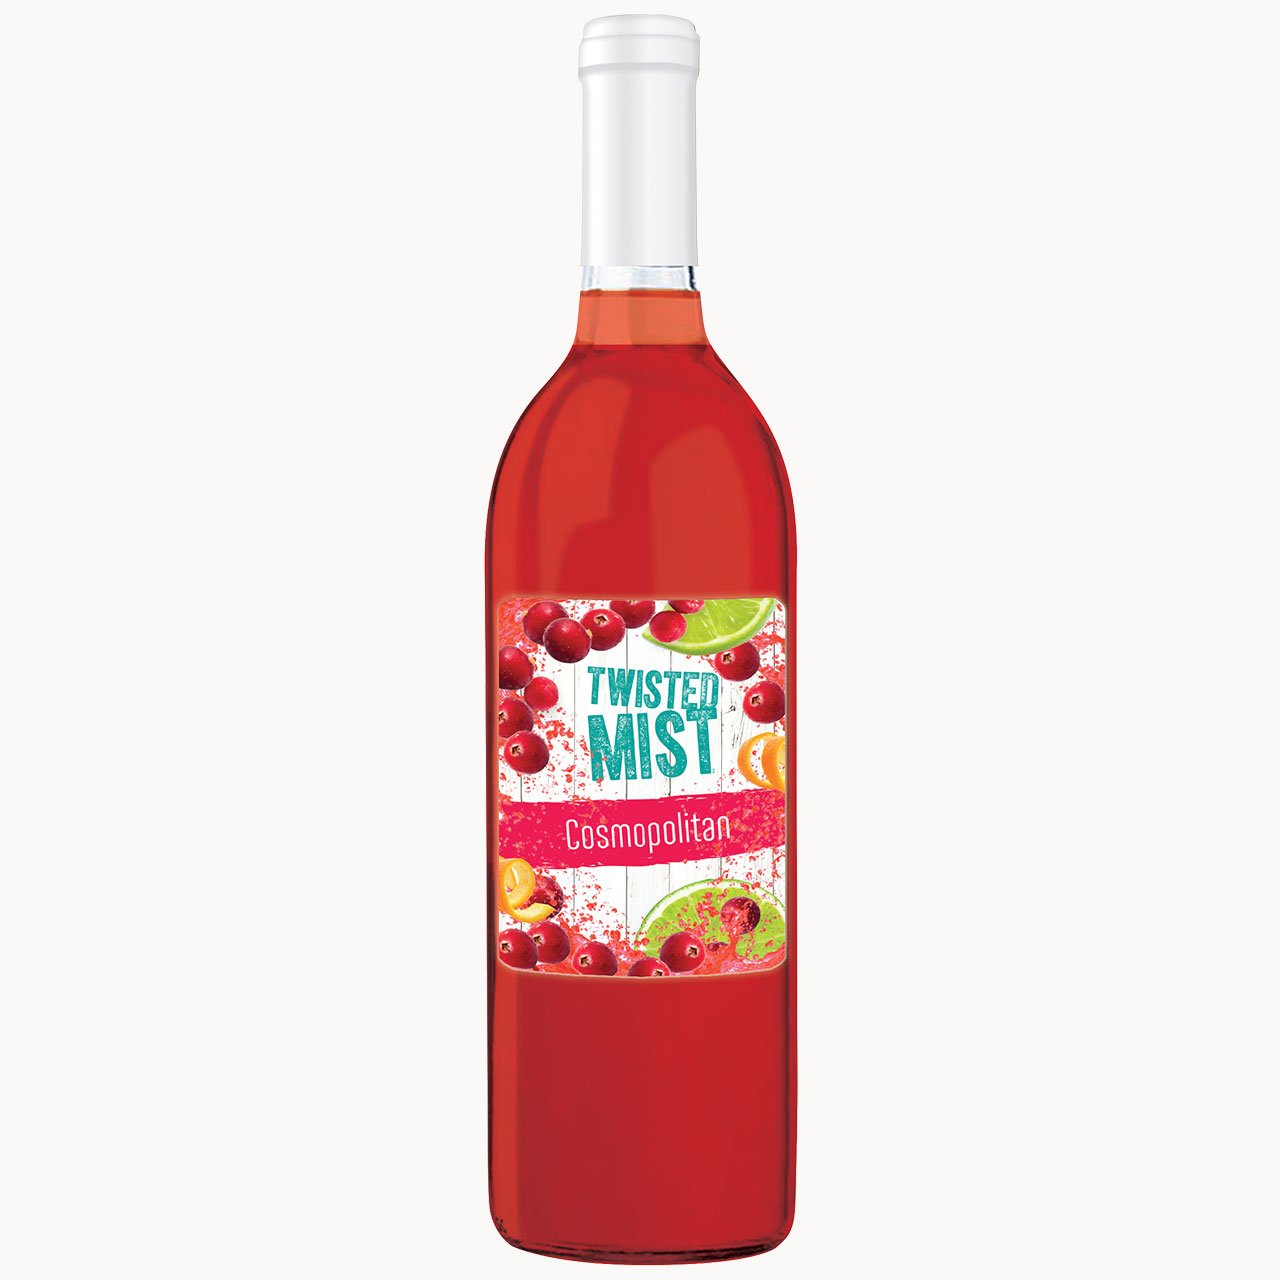 Cosmopolitan Wine Cocktail Recipe Kit - Winexpert Twisted Mist Limited Edition - Preorder